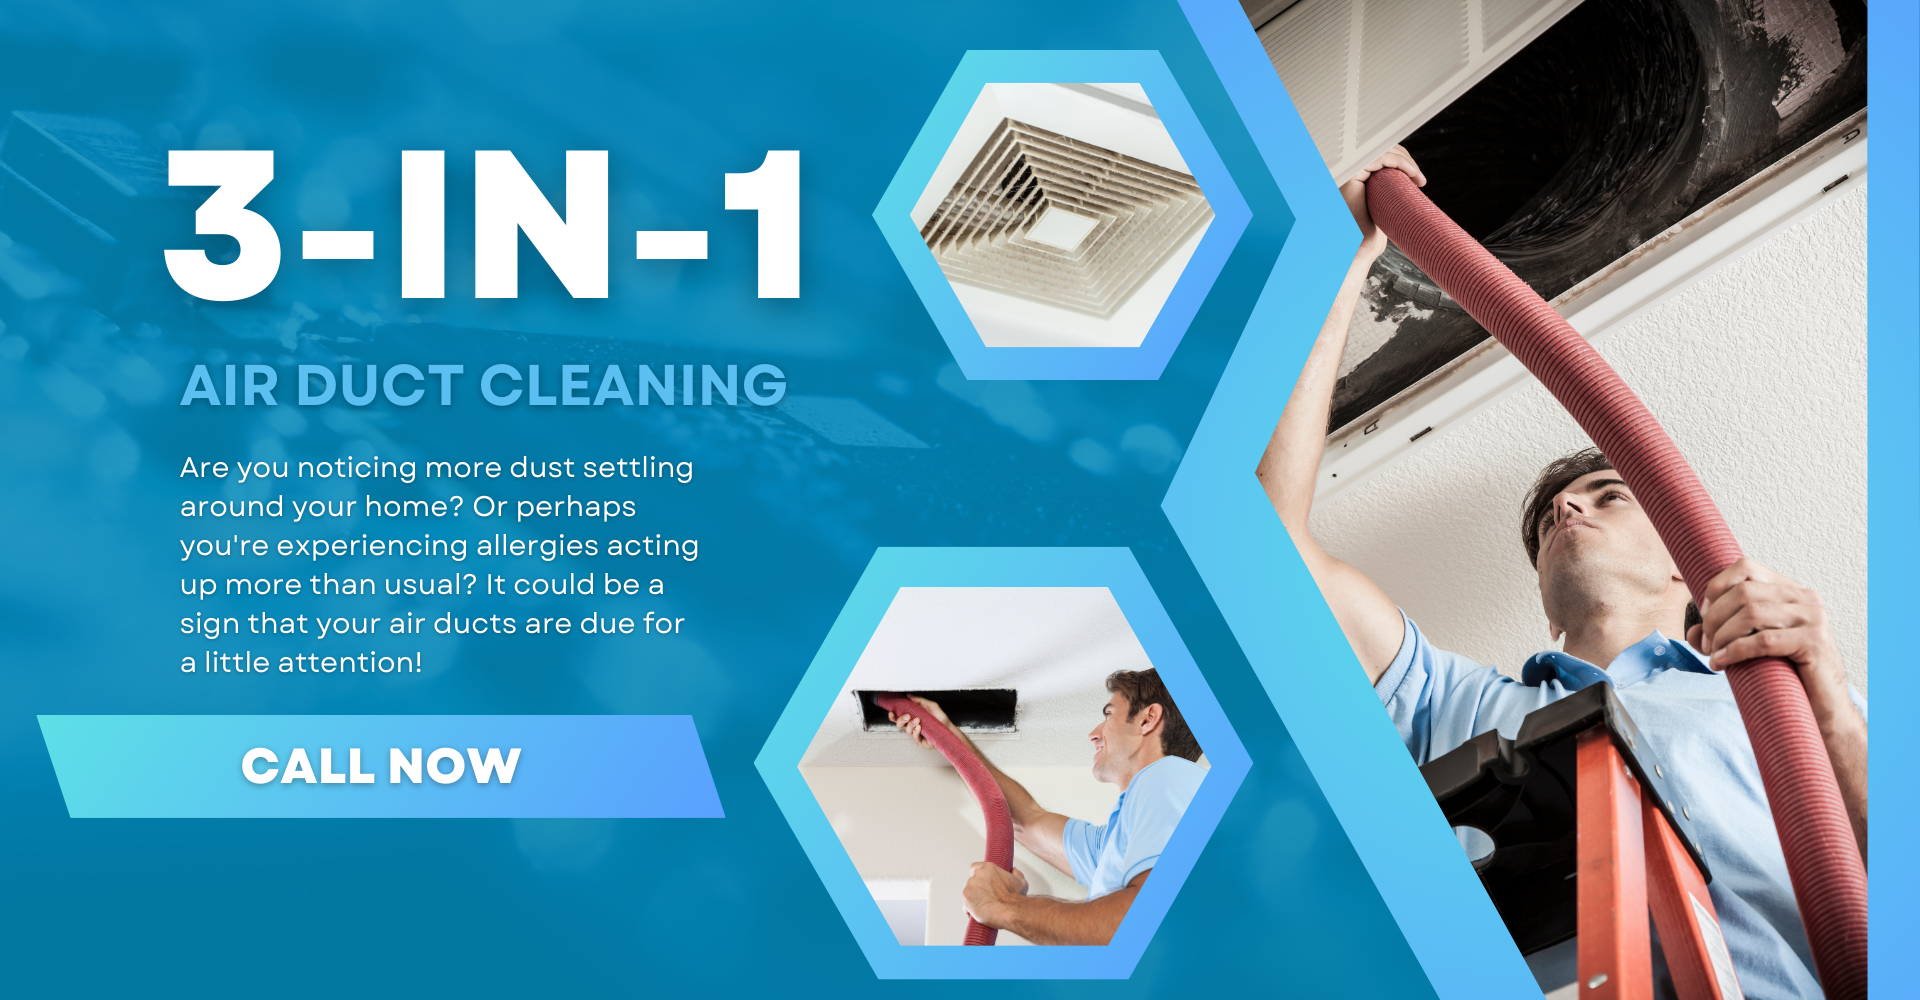 3-In-1 Air Duct Cleaning